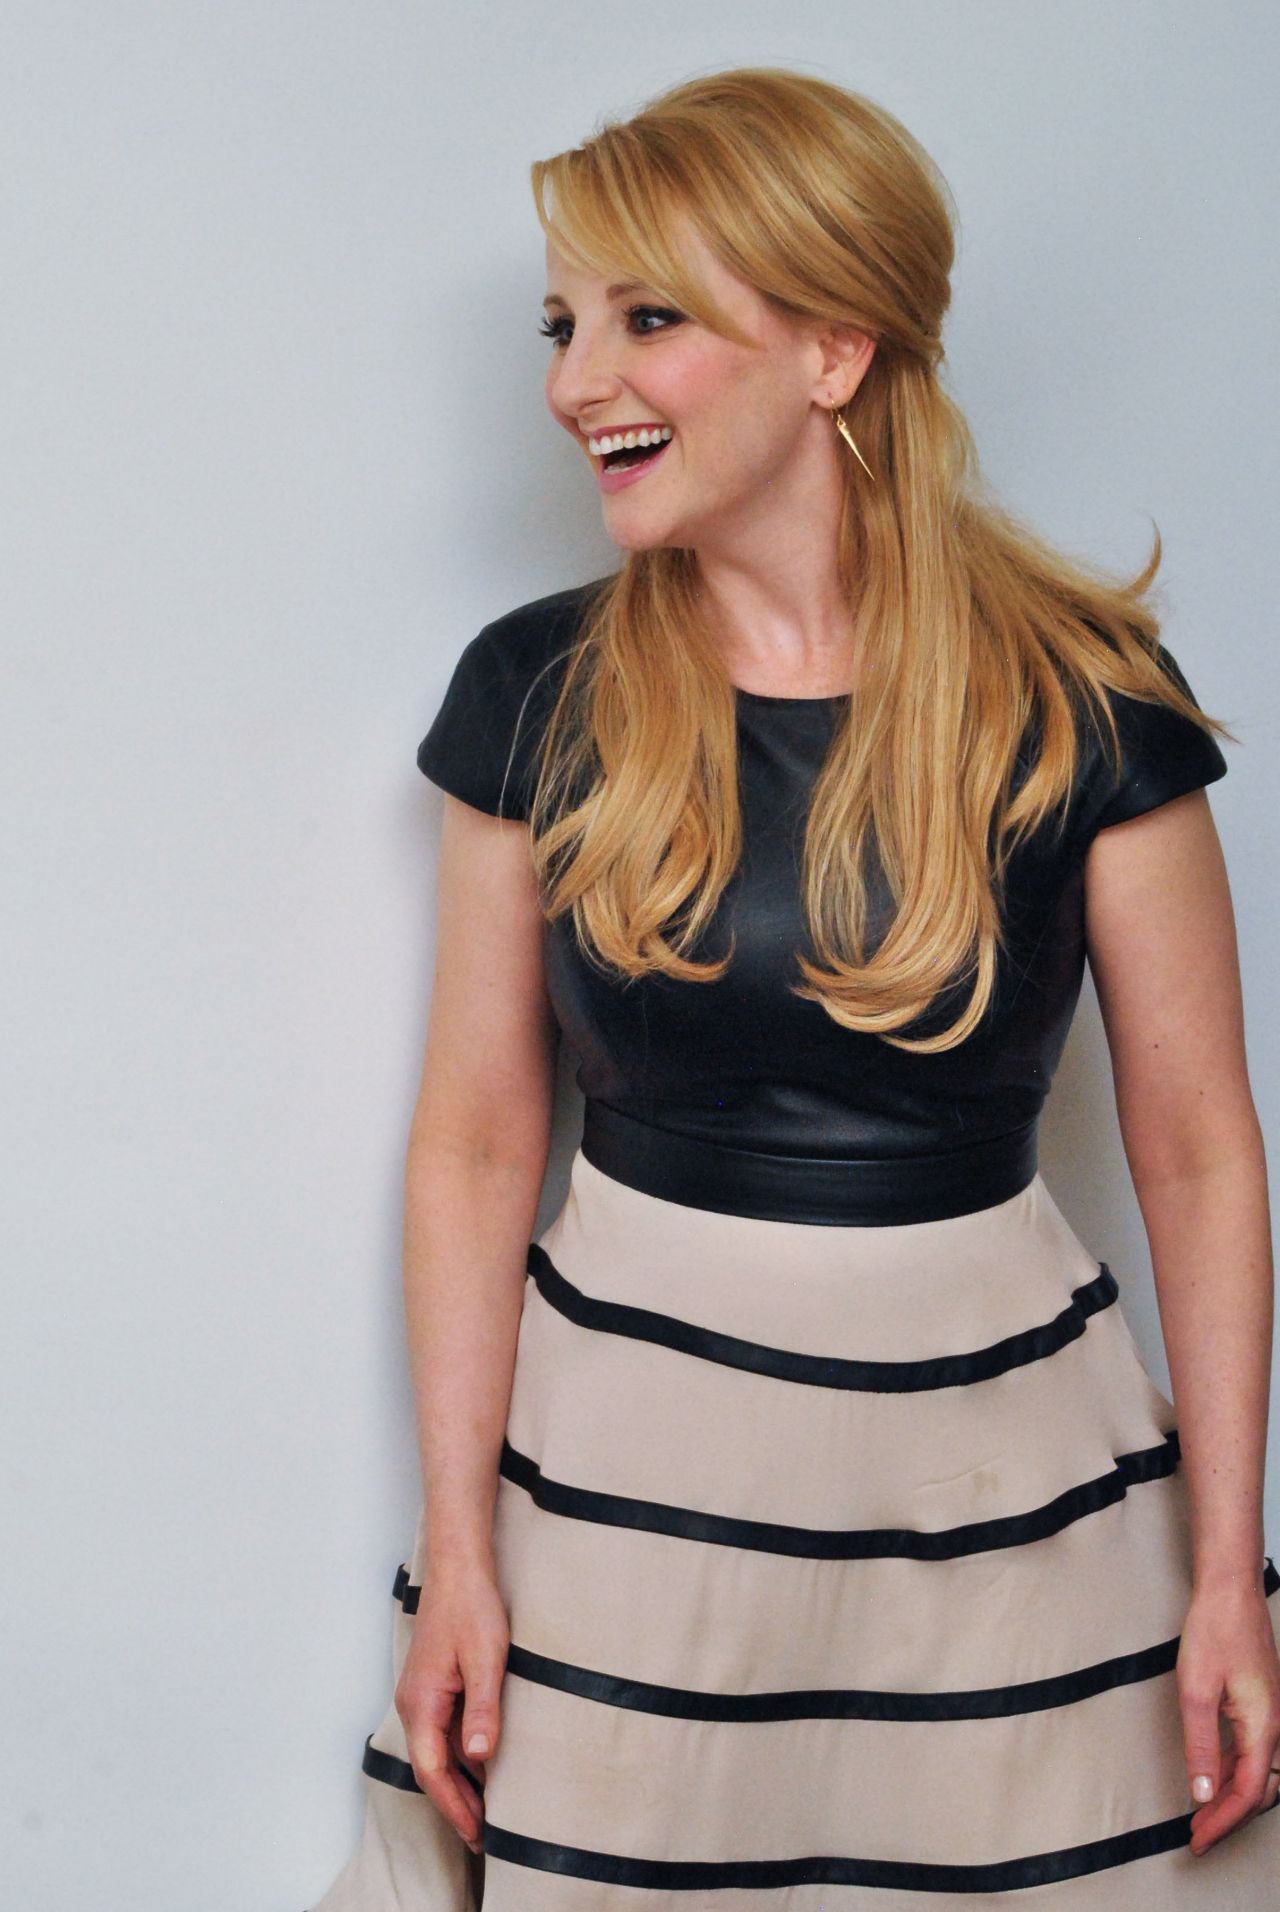 Melissa Rauch - 'The Bronze' Press Conference Portraits, March 2016 ...